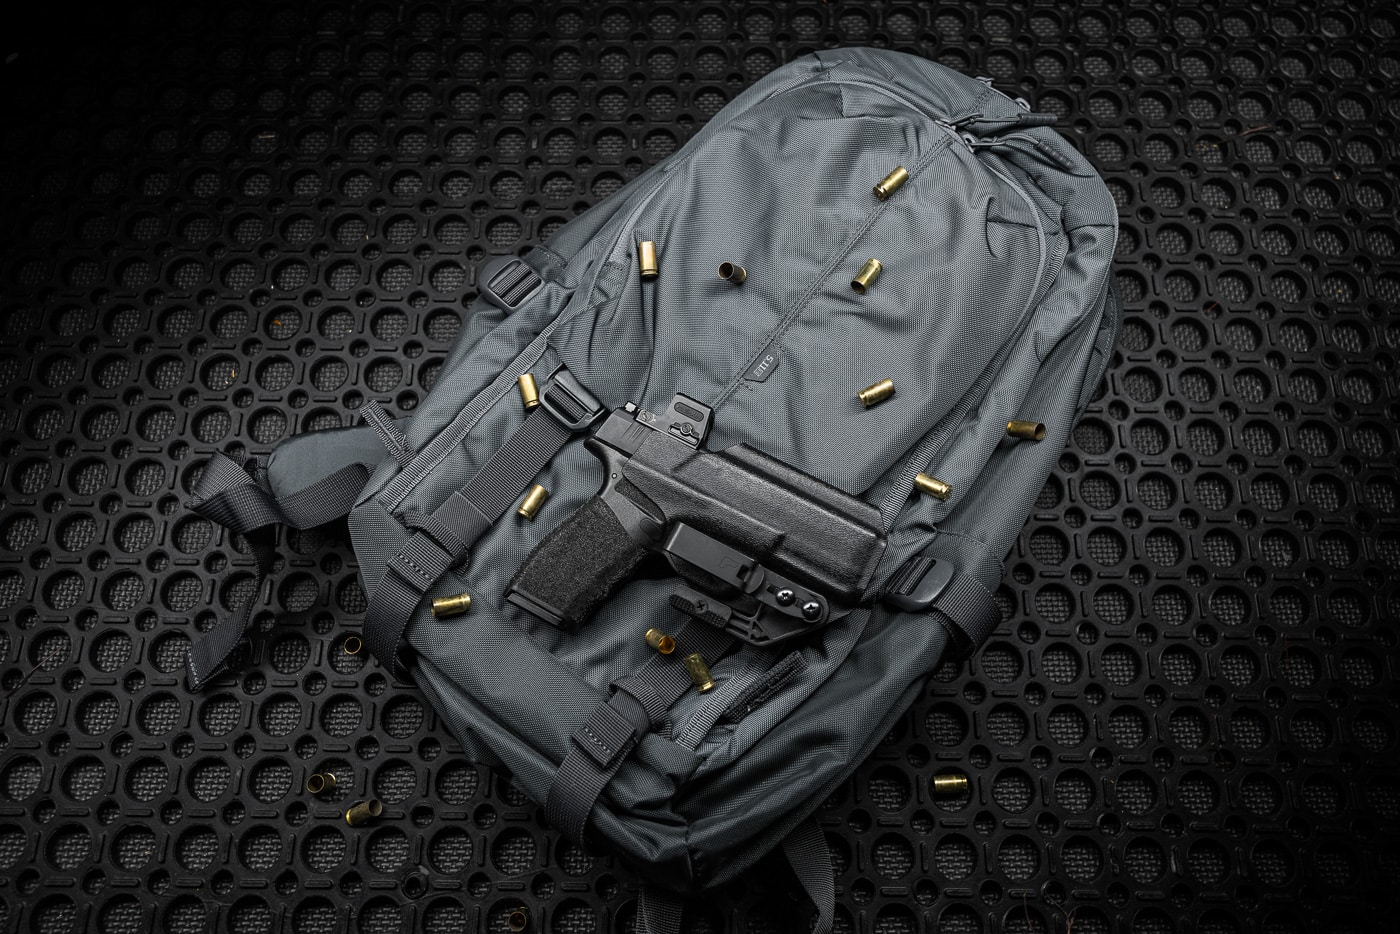 AllOutdoor Review - 5.11 Tactical LV18 Backpack 2.0 30L